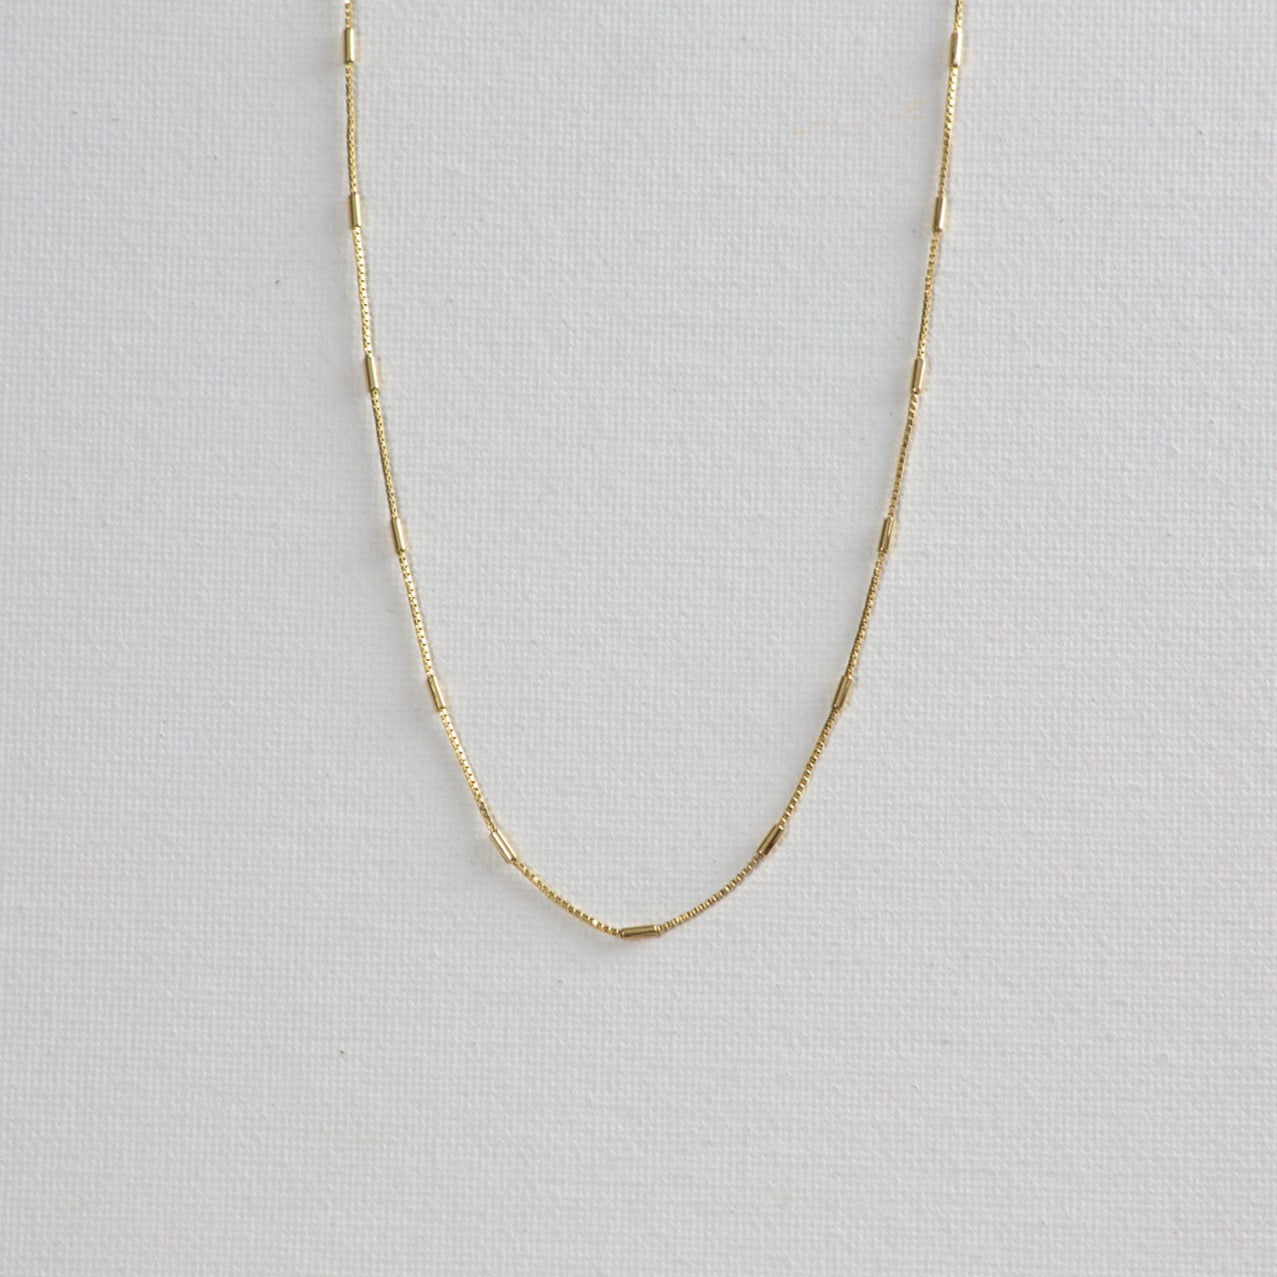 Morse necklace, a gold chain with alternating box chain and tiny gold bar, on a white background.